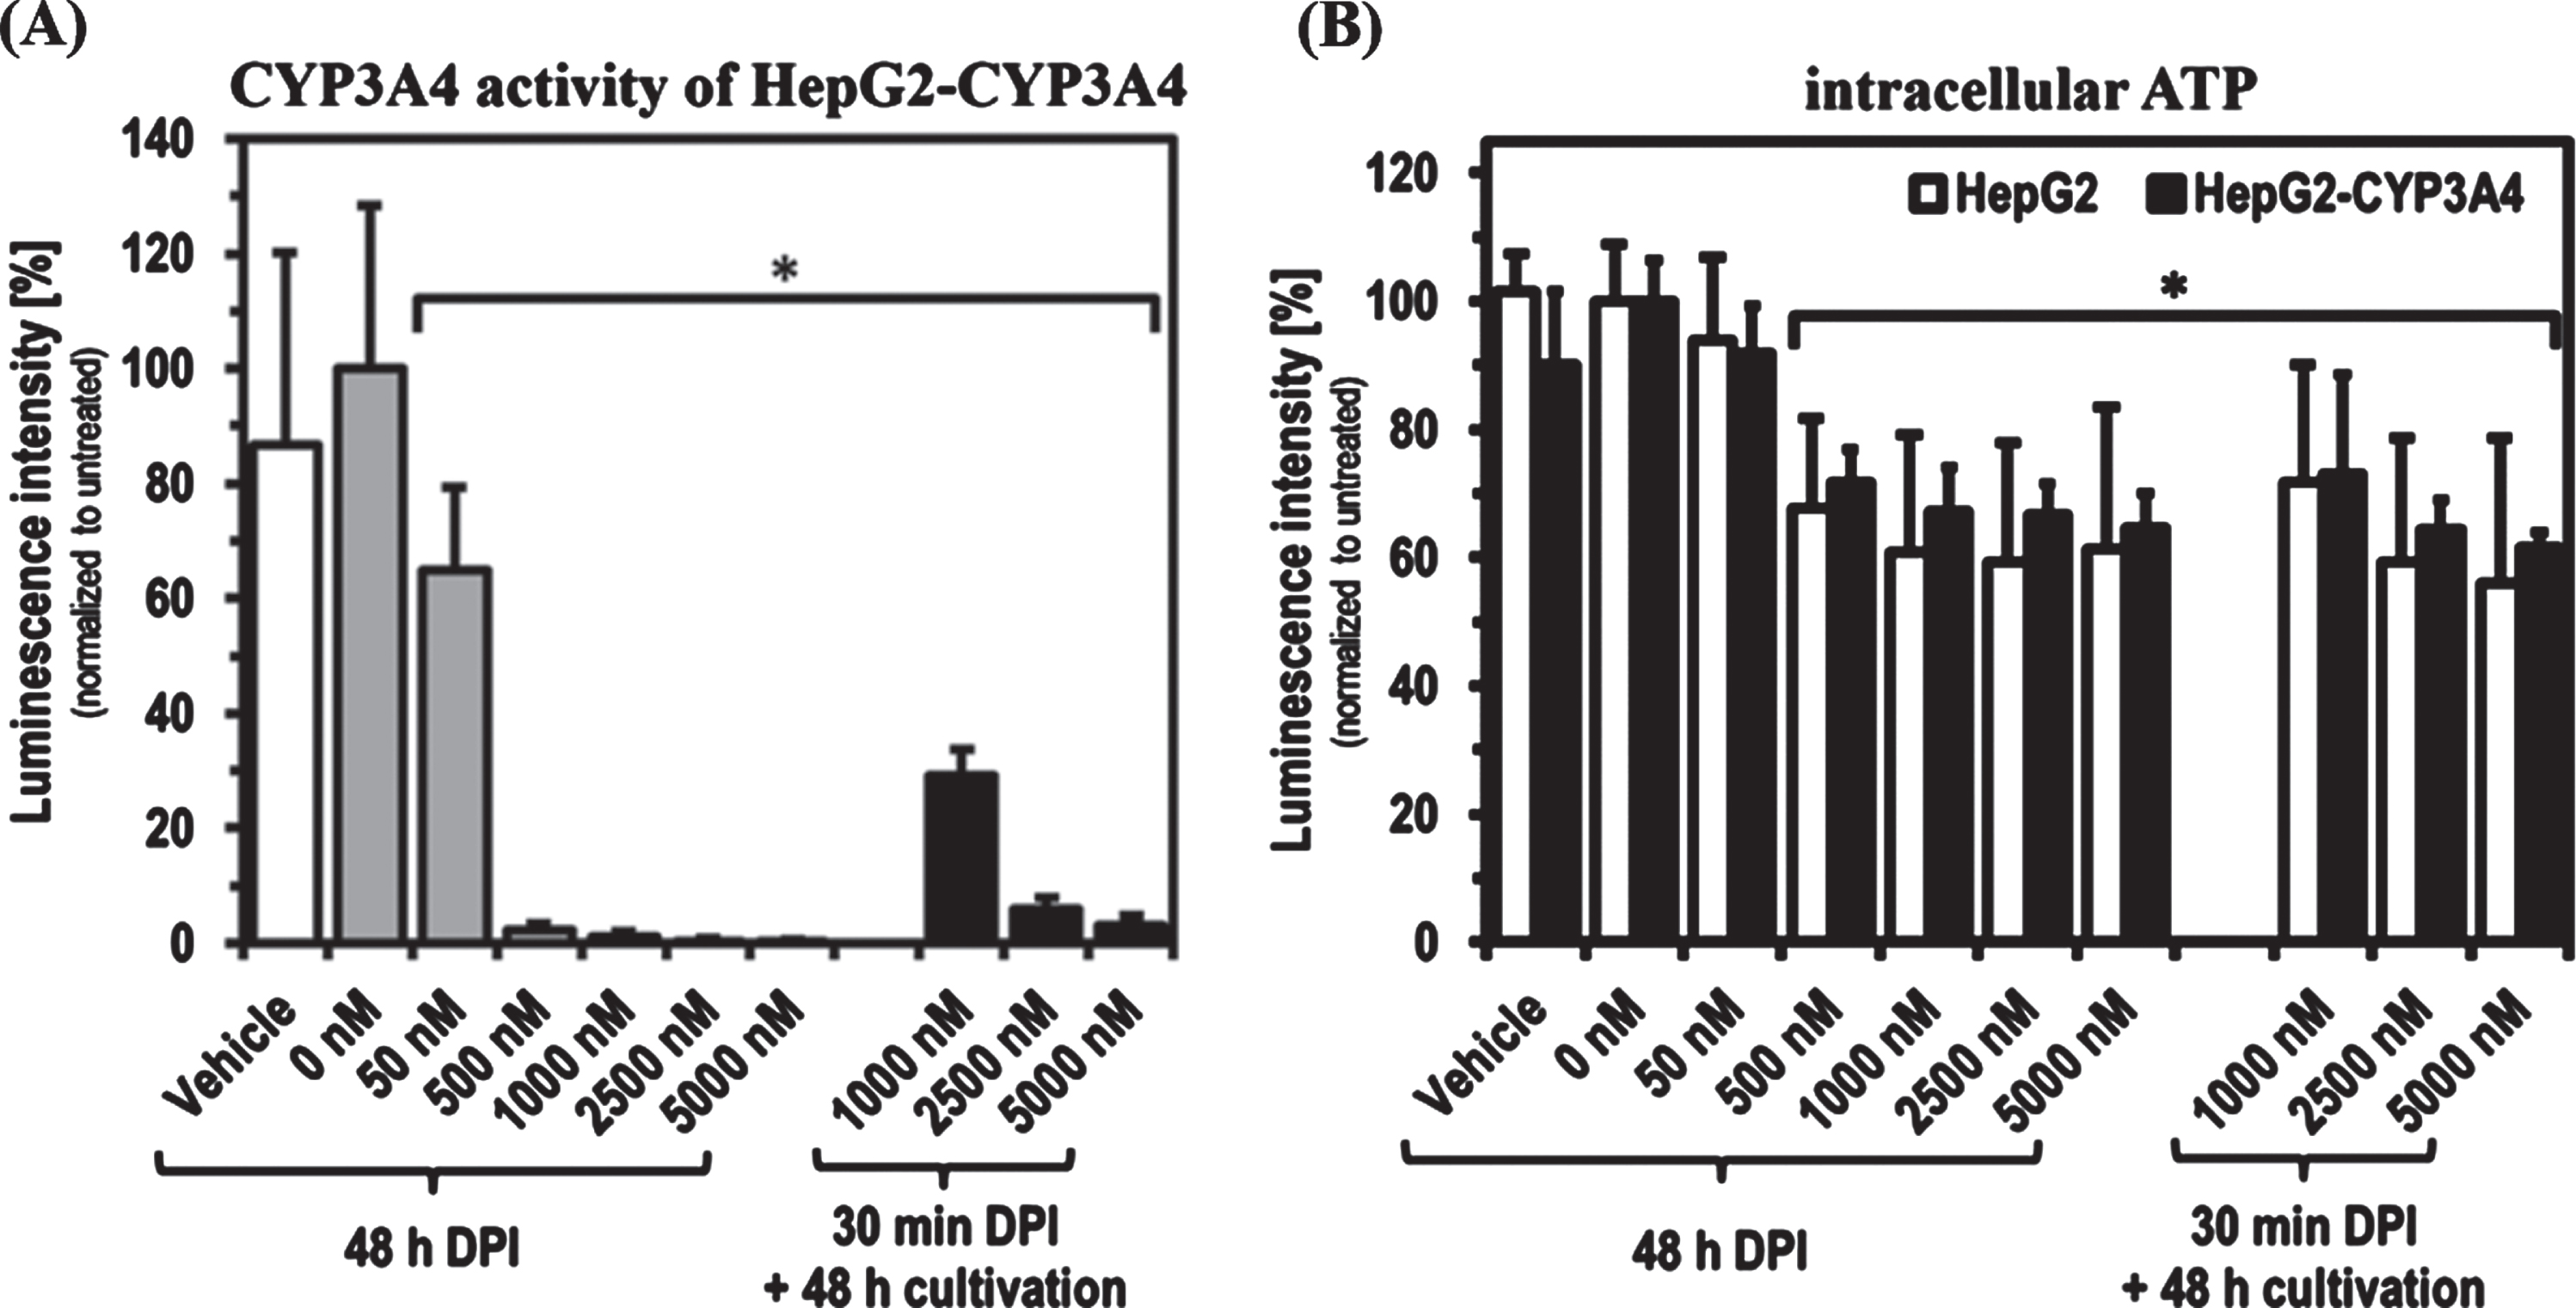 CYP3A4 activity and ATP level after 48 h DPI treatment as well as recovery after 30 min DPI treatment. Determination of CYP3A4 activity in HepG2-CYP3A4 (A) and intracellular ATP level in both cell lines (B) after DPI treatment for 48 h as well as for 30 min with following 48 h recovery in DPI-free medium (Mean±standard deviation; *p < 0.05 compared to untreated cells; n = 6 from two independent experiments).